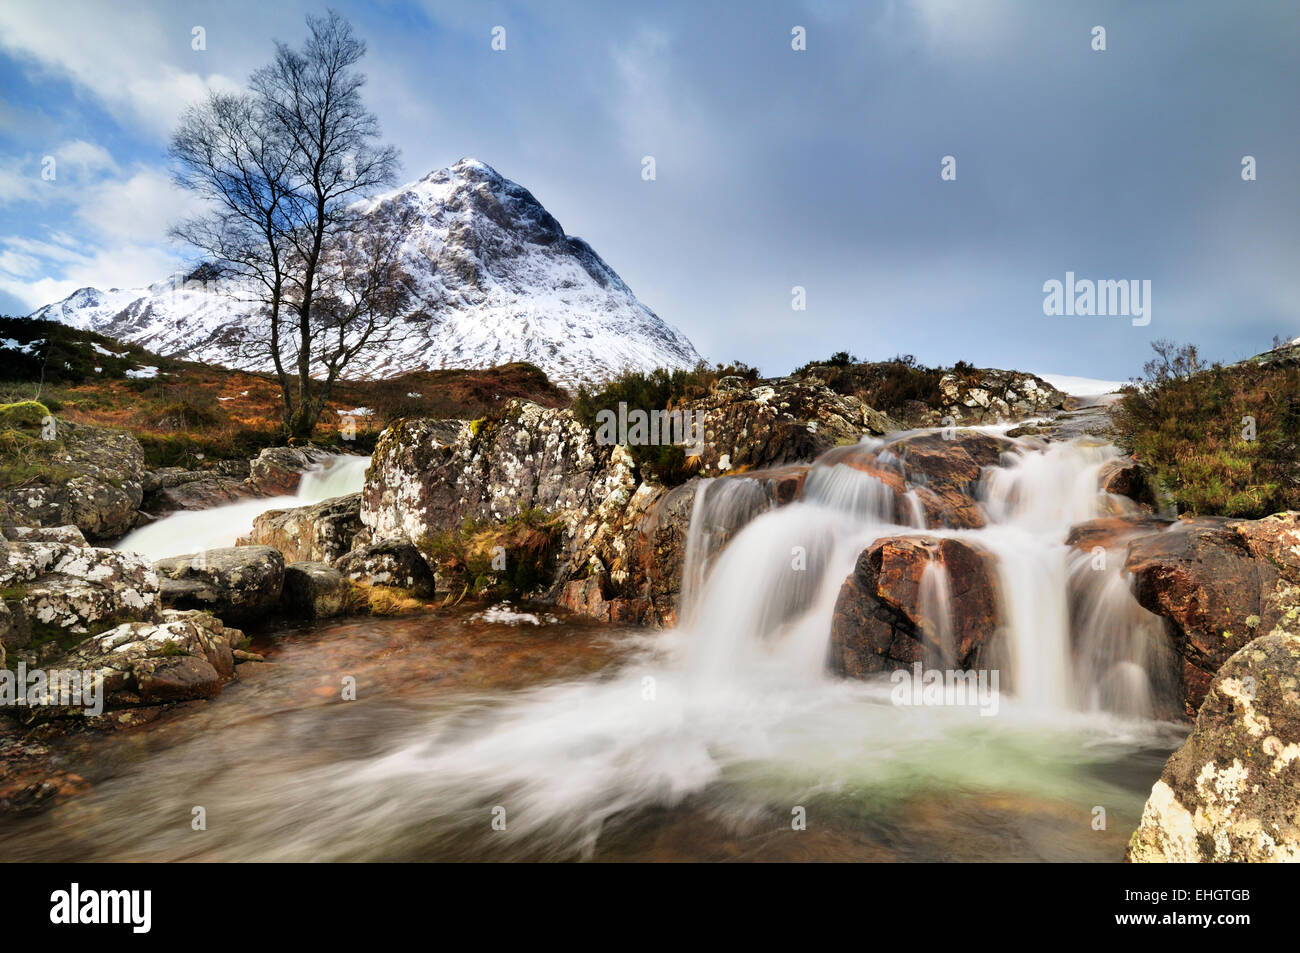 Highlands, Scotland, River Coupall going over falls near the entrance to Glen Etive with Stob Dearg mountain in the background. Stock Photo